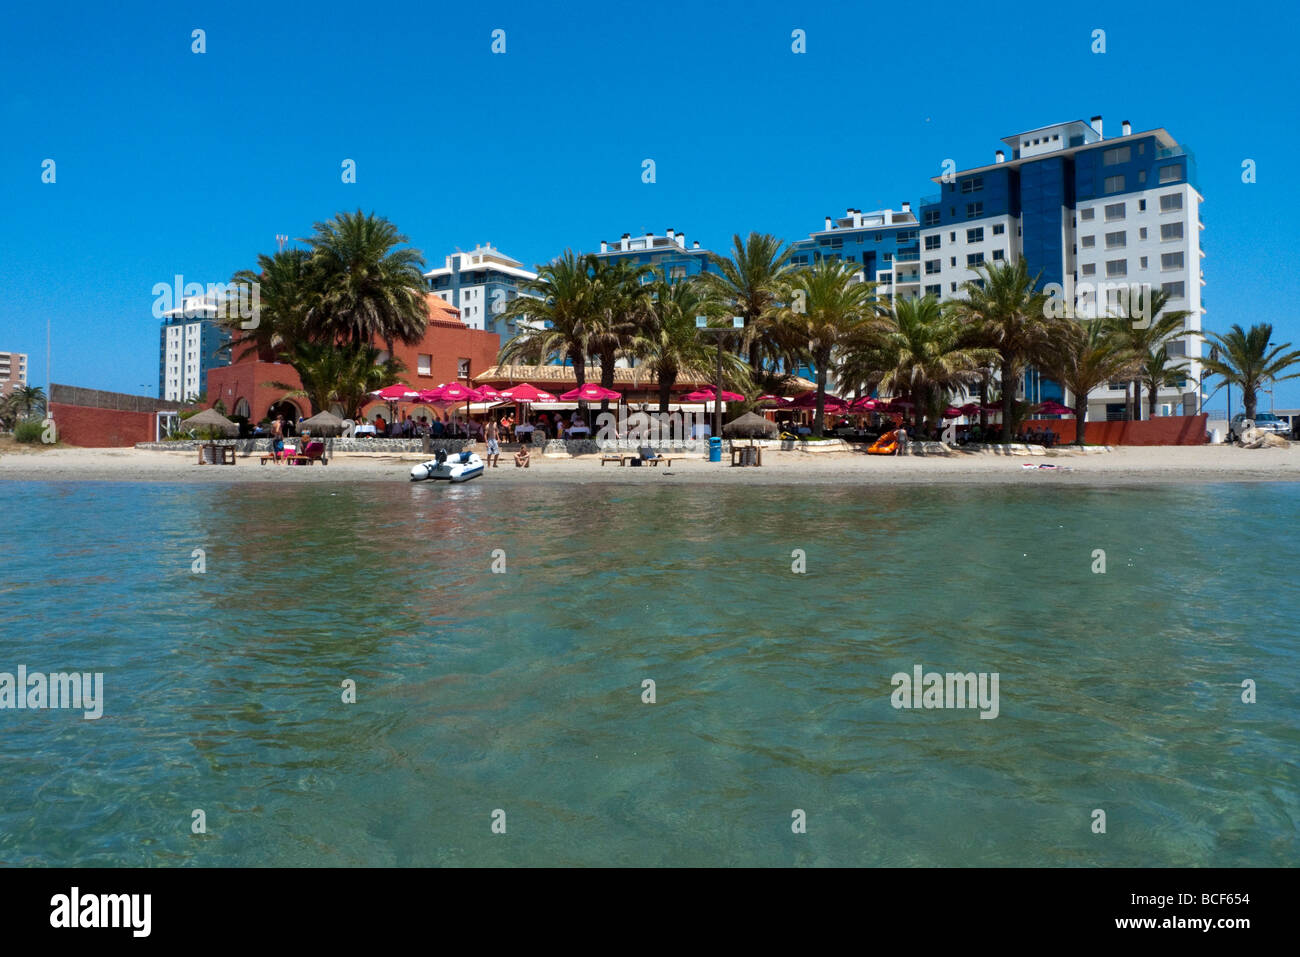 Holiday Apartments, Restaurants, Bar and beach by the Mar Menor (Inland Sea) in the region of Murcia, Spain Stock Photo